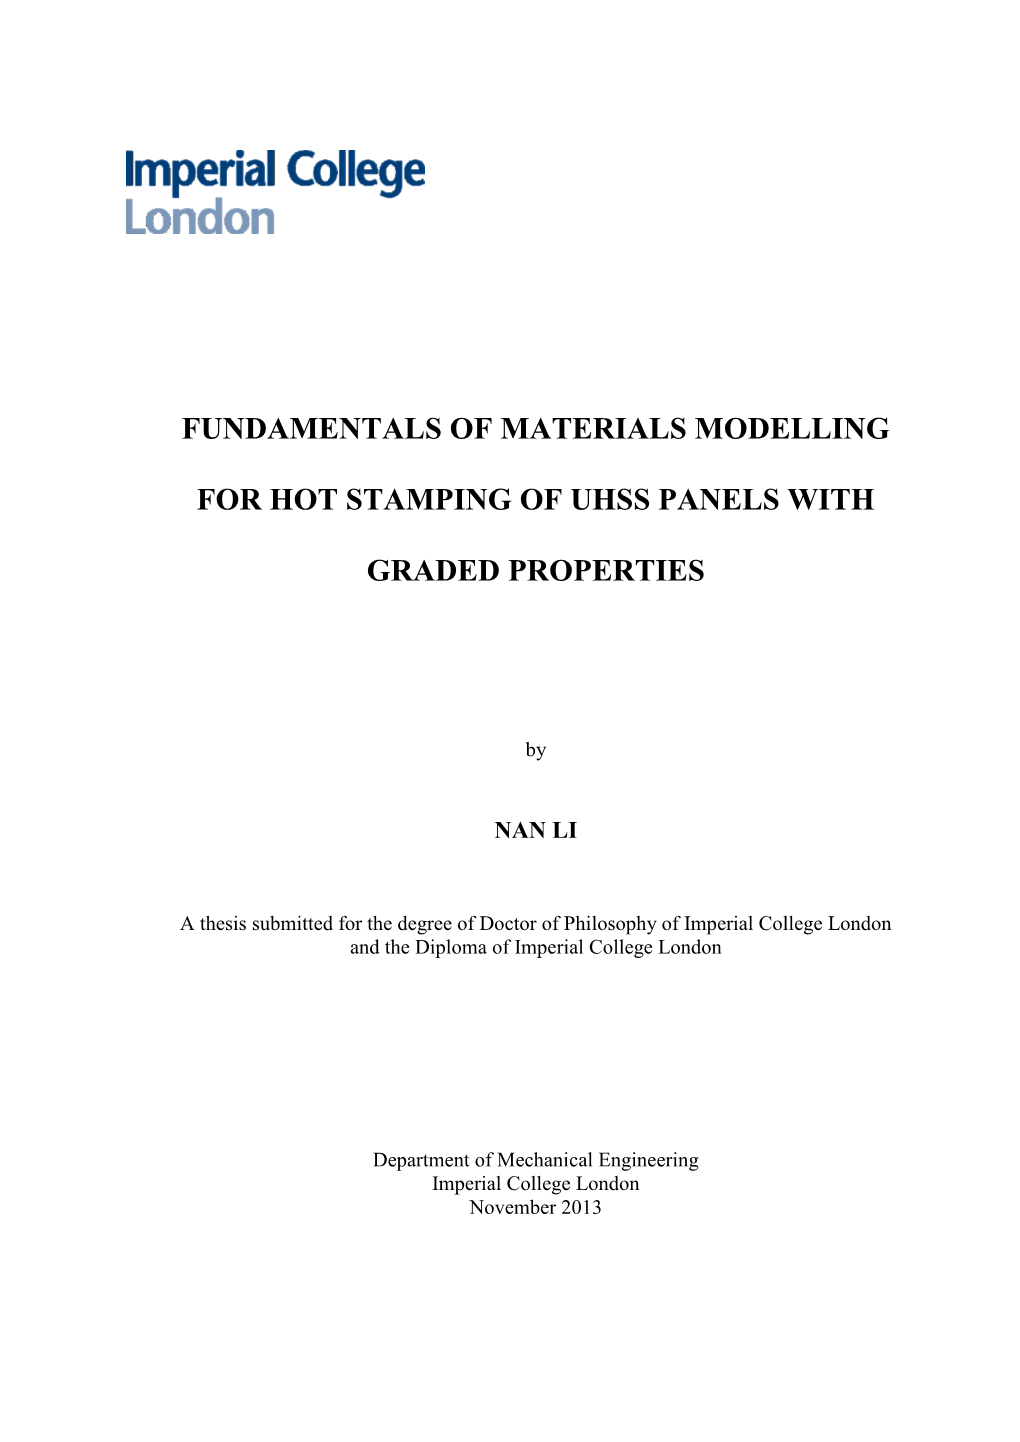 Fundamentals of Materials Modelling for Hot Stamping of UHSS Panels with Graded Properties’ Is My Own, All Else Is Appropriately Referenced